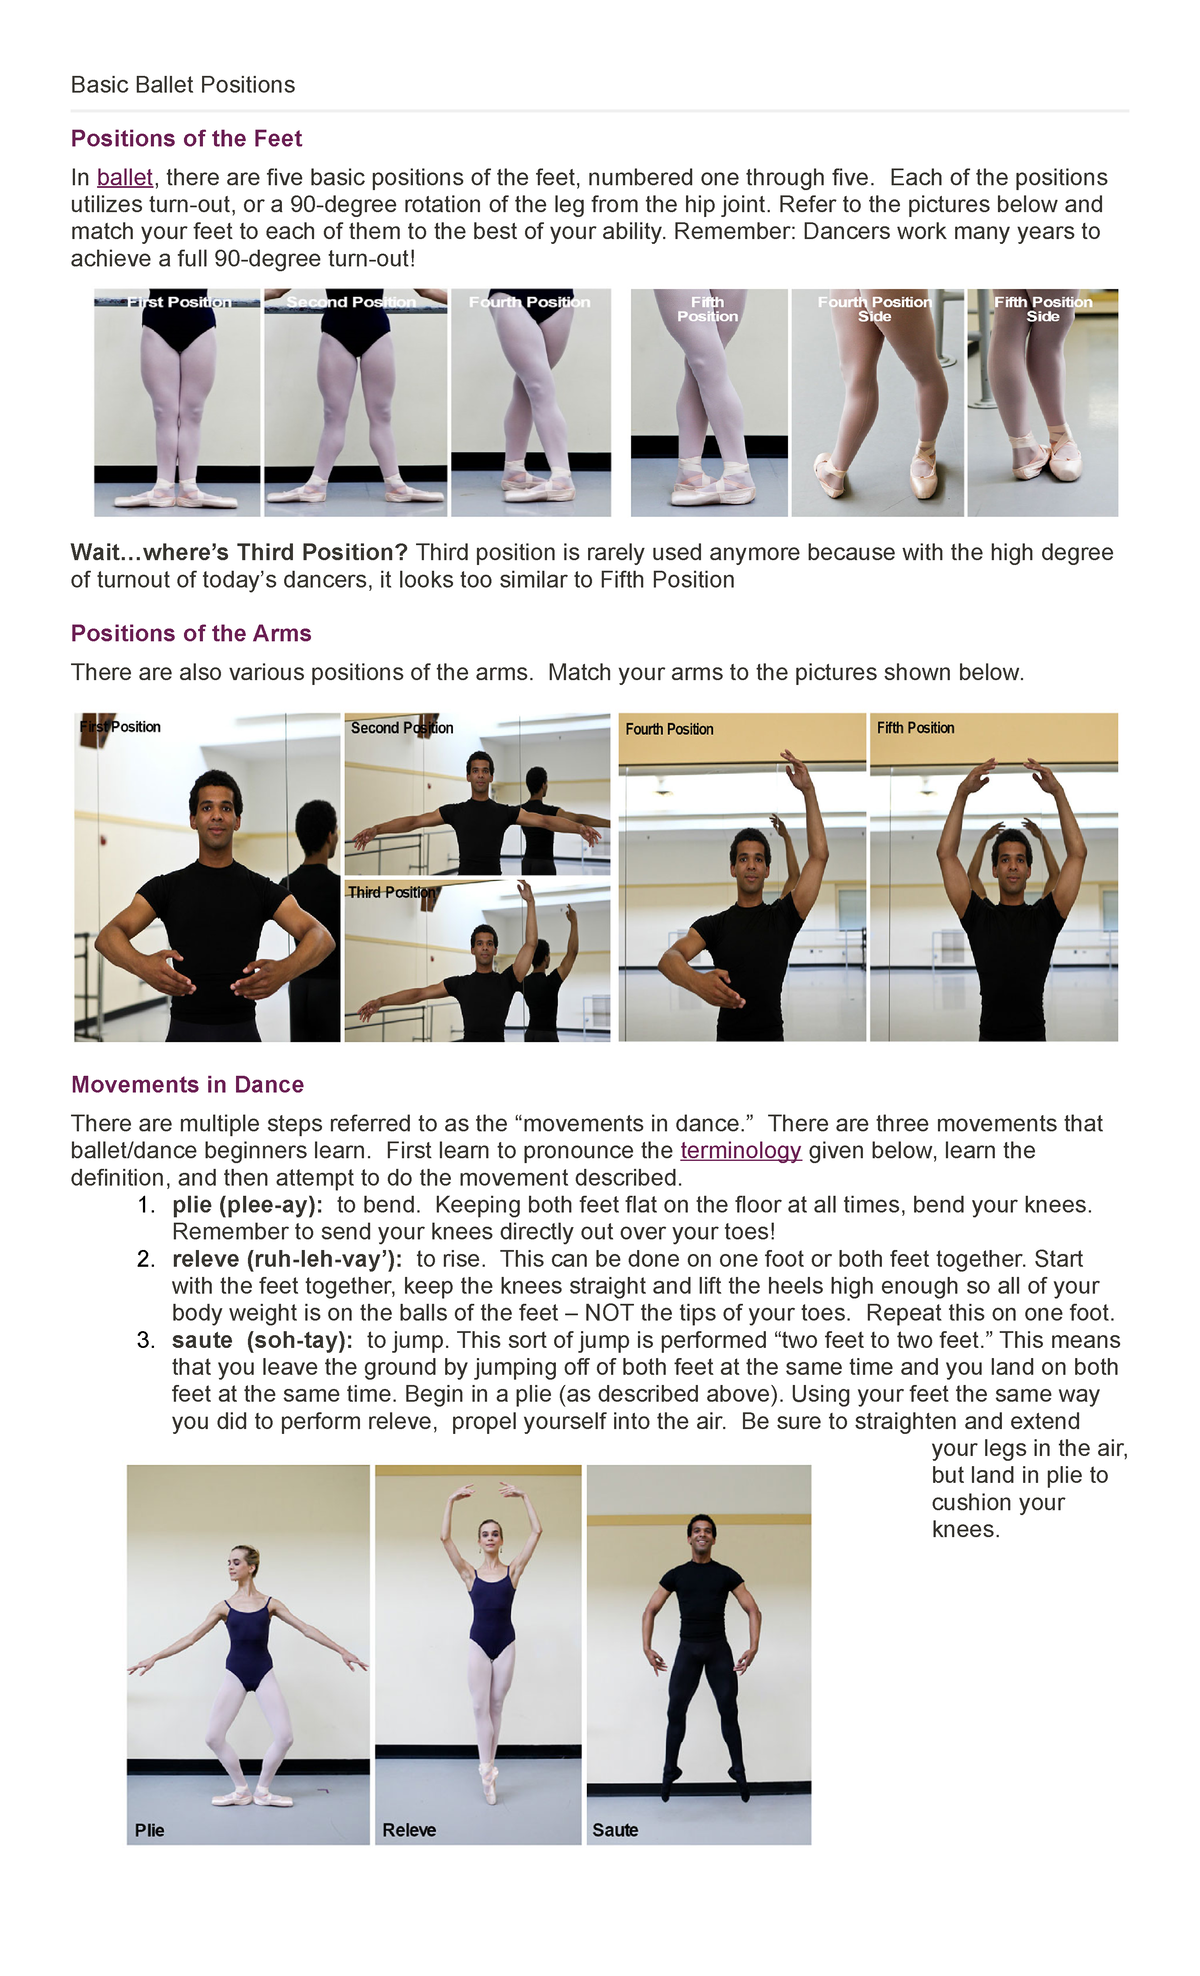 Basic Ballet Positions Basic Ballet Positions Positions Of The Feet